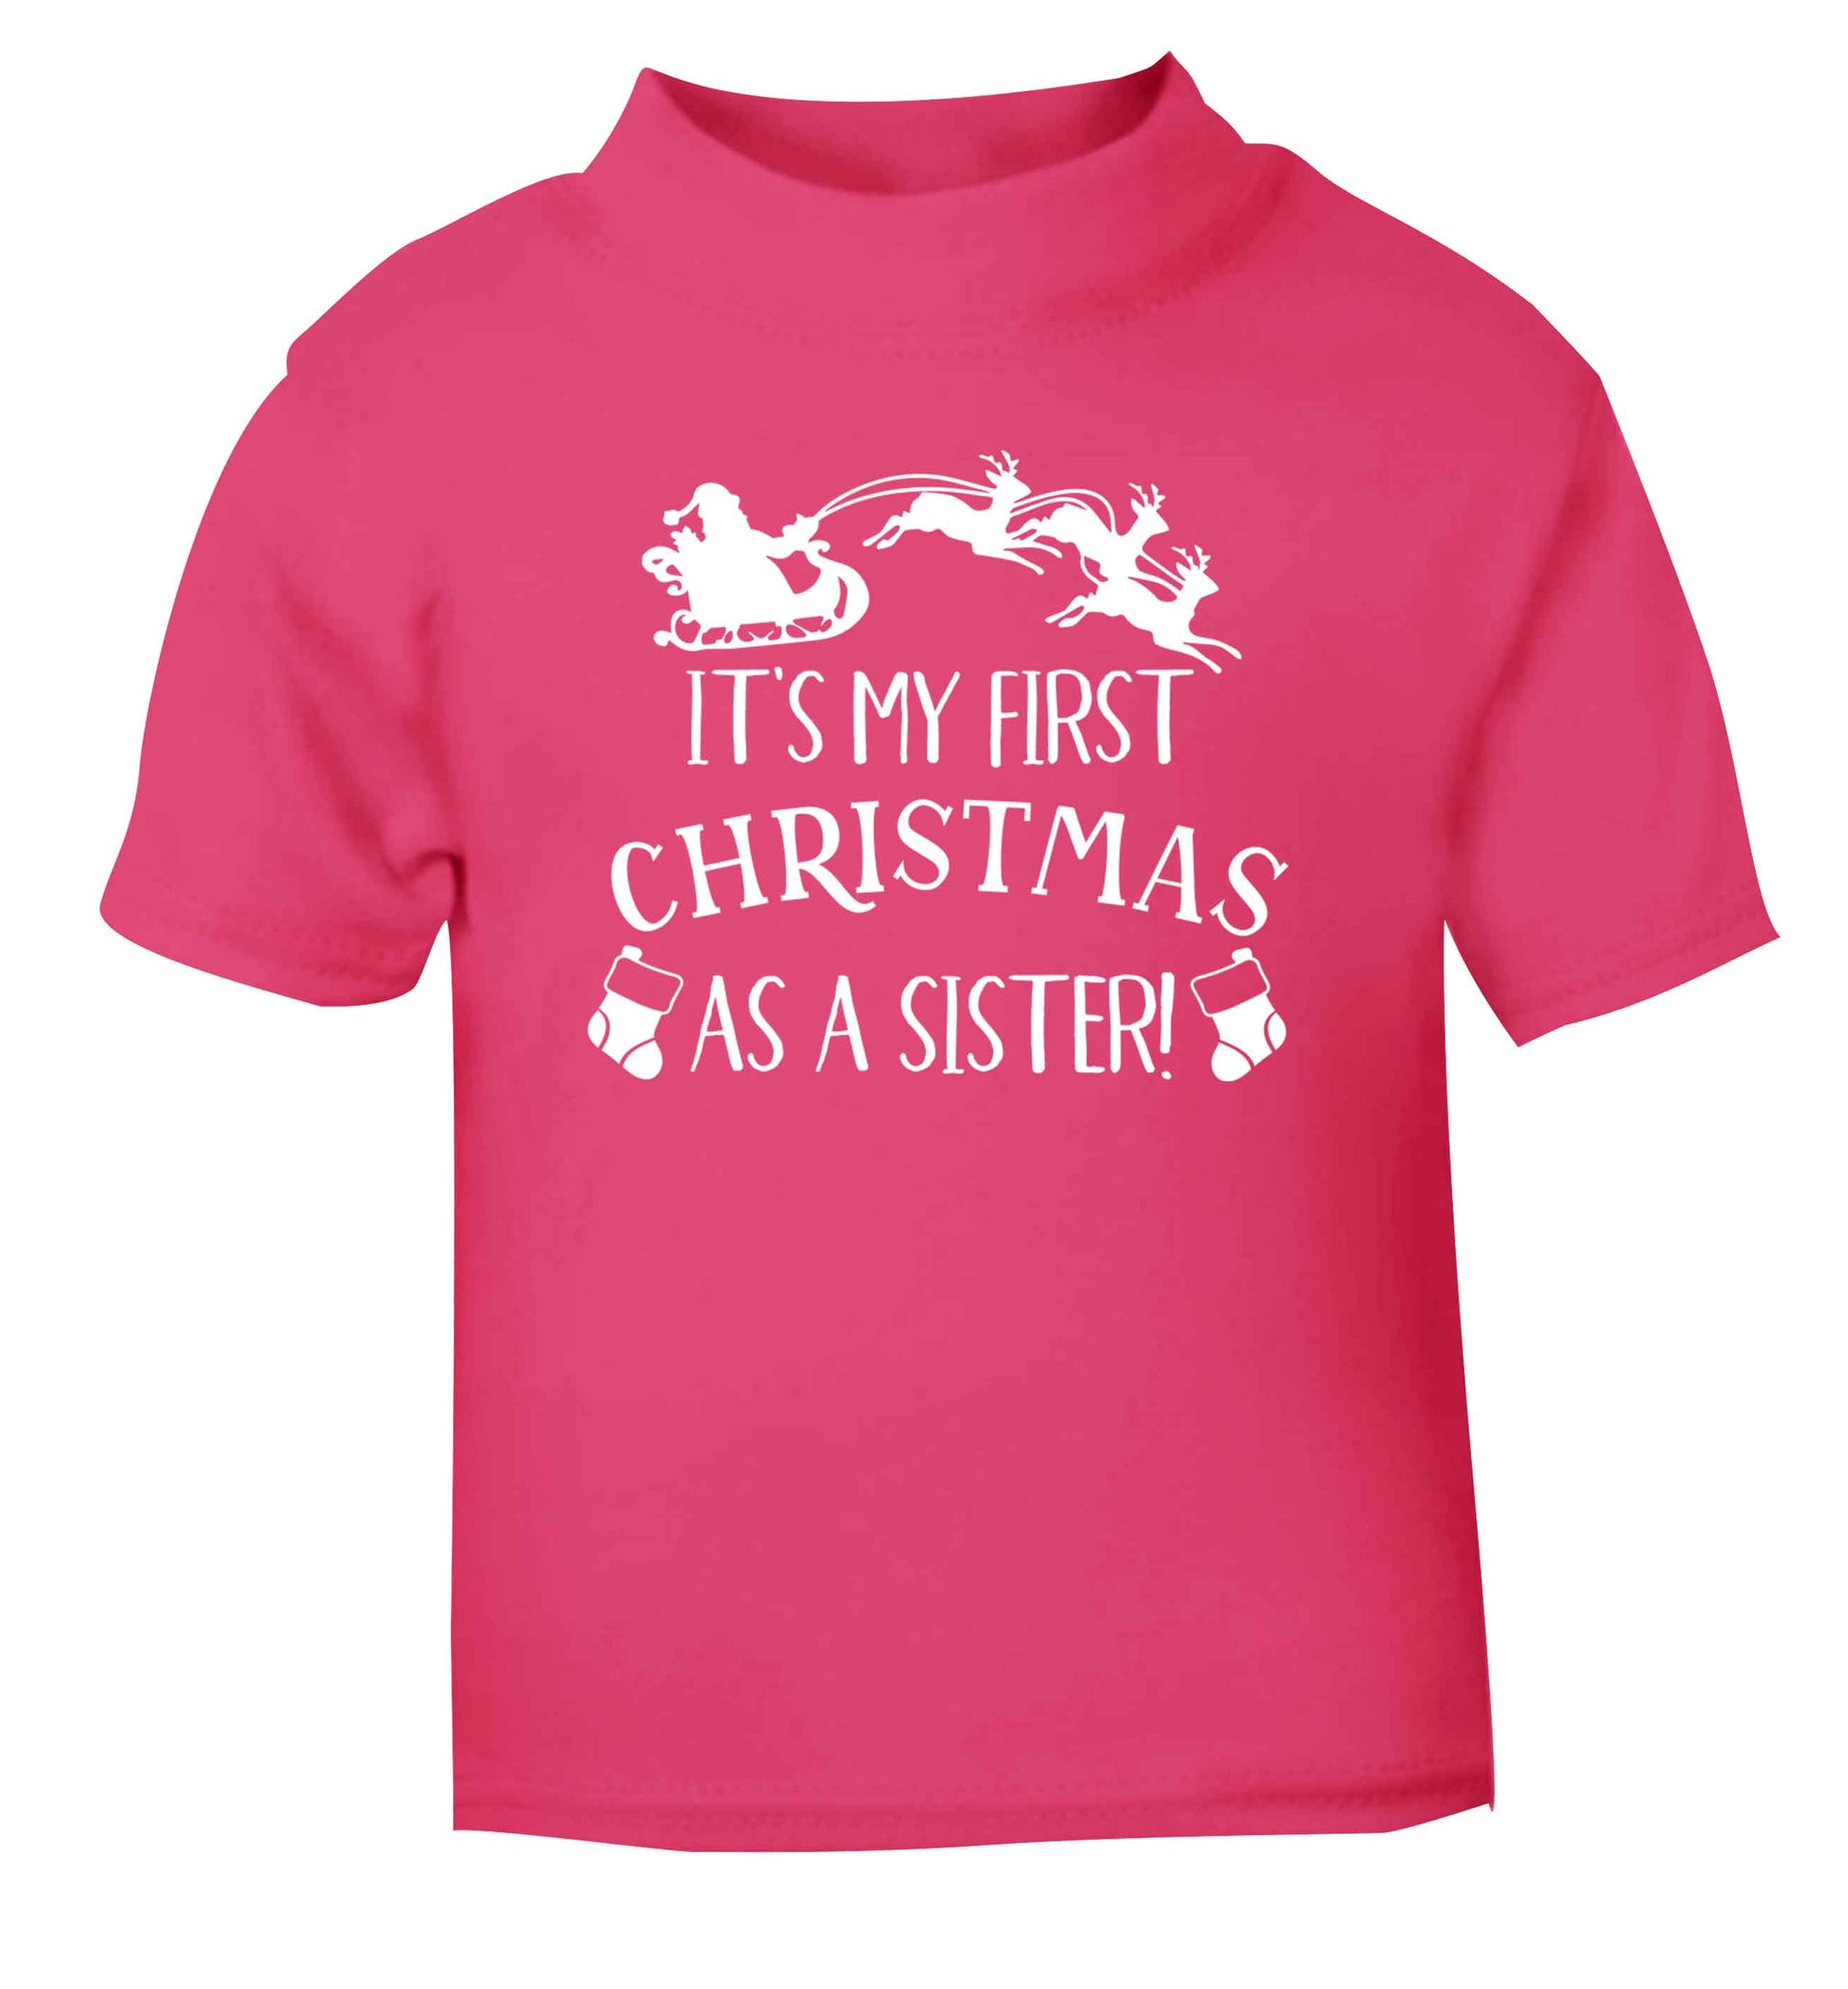 It's my first Christmas as a sister! pink Baby Toddler Tshirt 2 Years